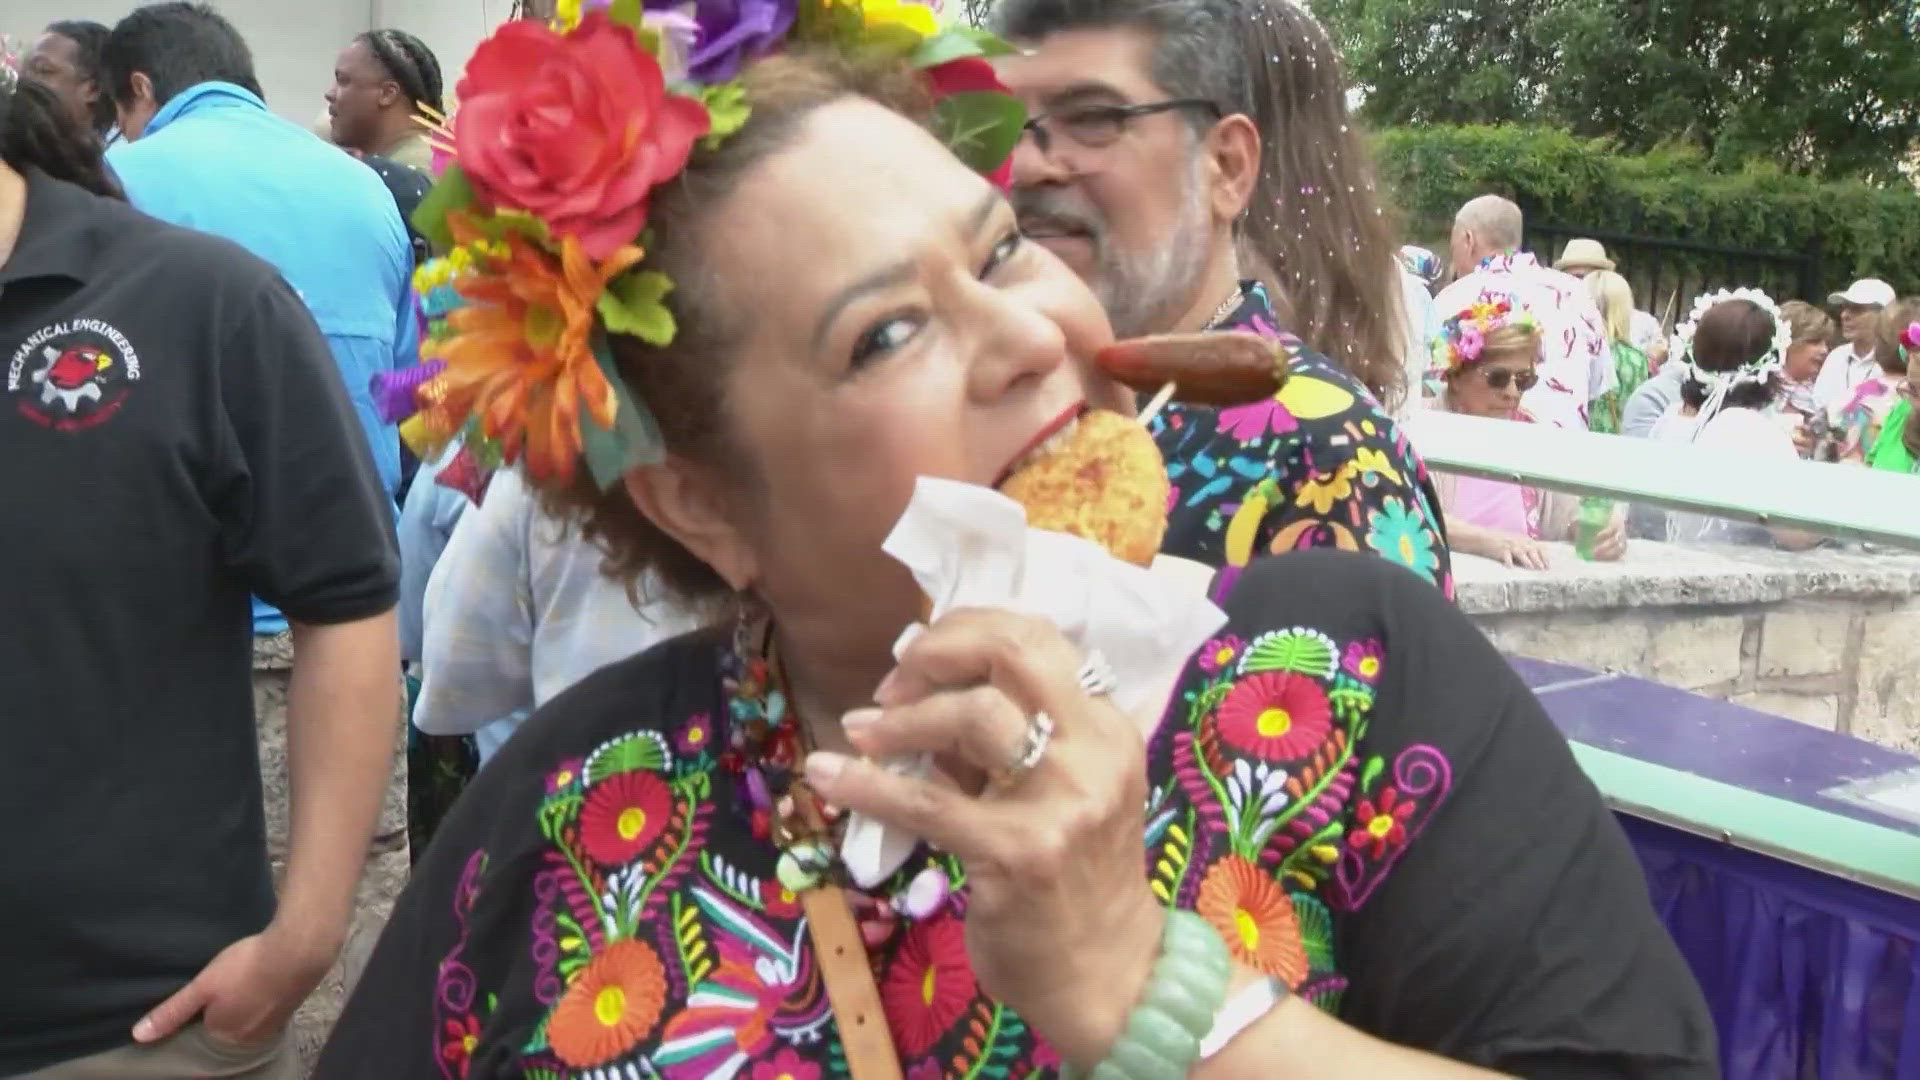 KENS 5's Nate Ryan takes a look at all the Fiesta fun going down at day one of NIOSA.